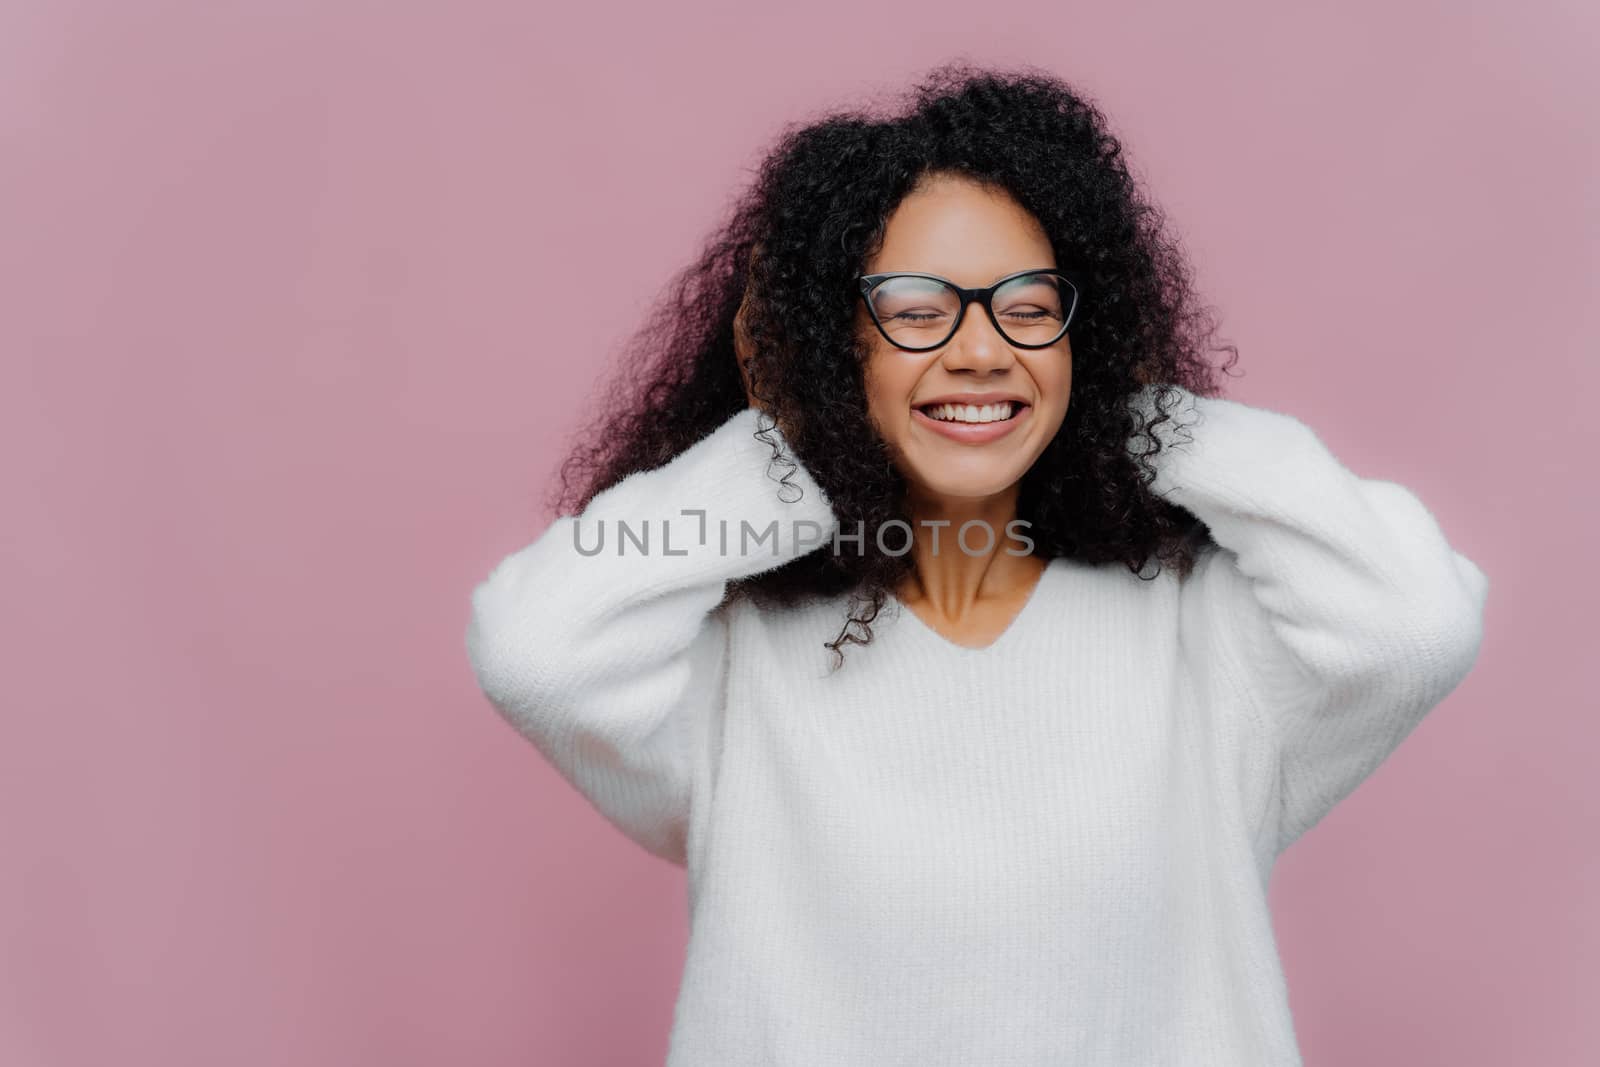 Portrait of joyous pleasant looking African American woman covers both ears with hands, hears loud music, smiles broadly, wears spectacles and white warm sweater, poses indoor, being very emotional